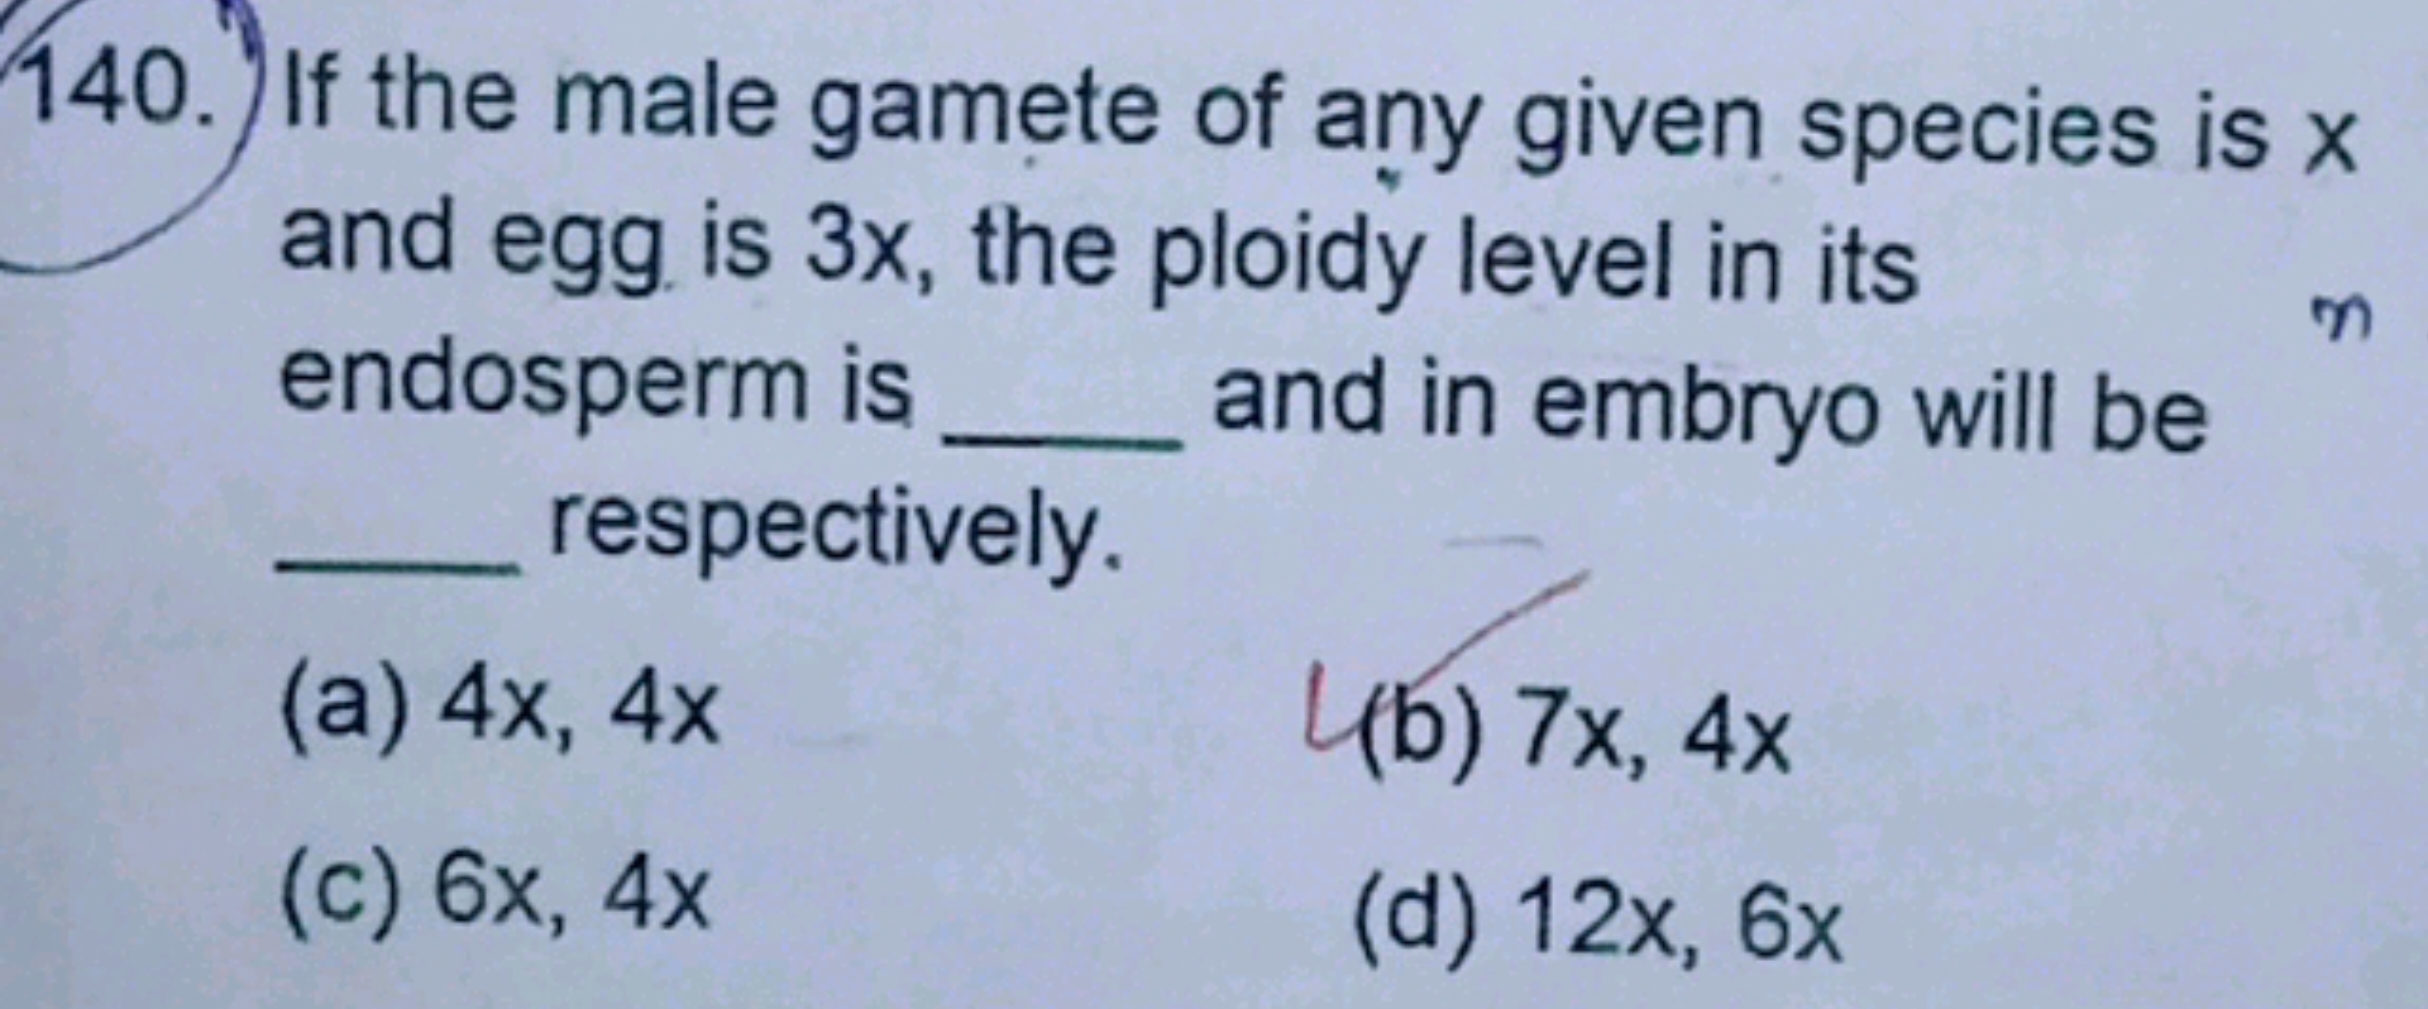 If the male gamete of any given species is x and egg is 3x, the ploidy